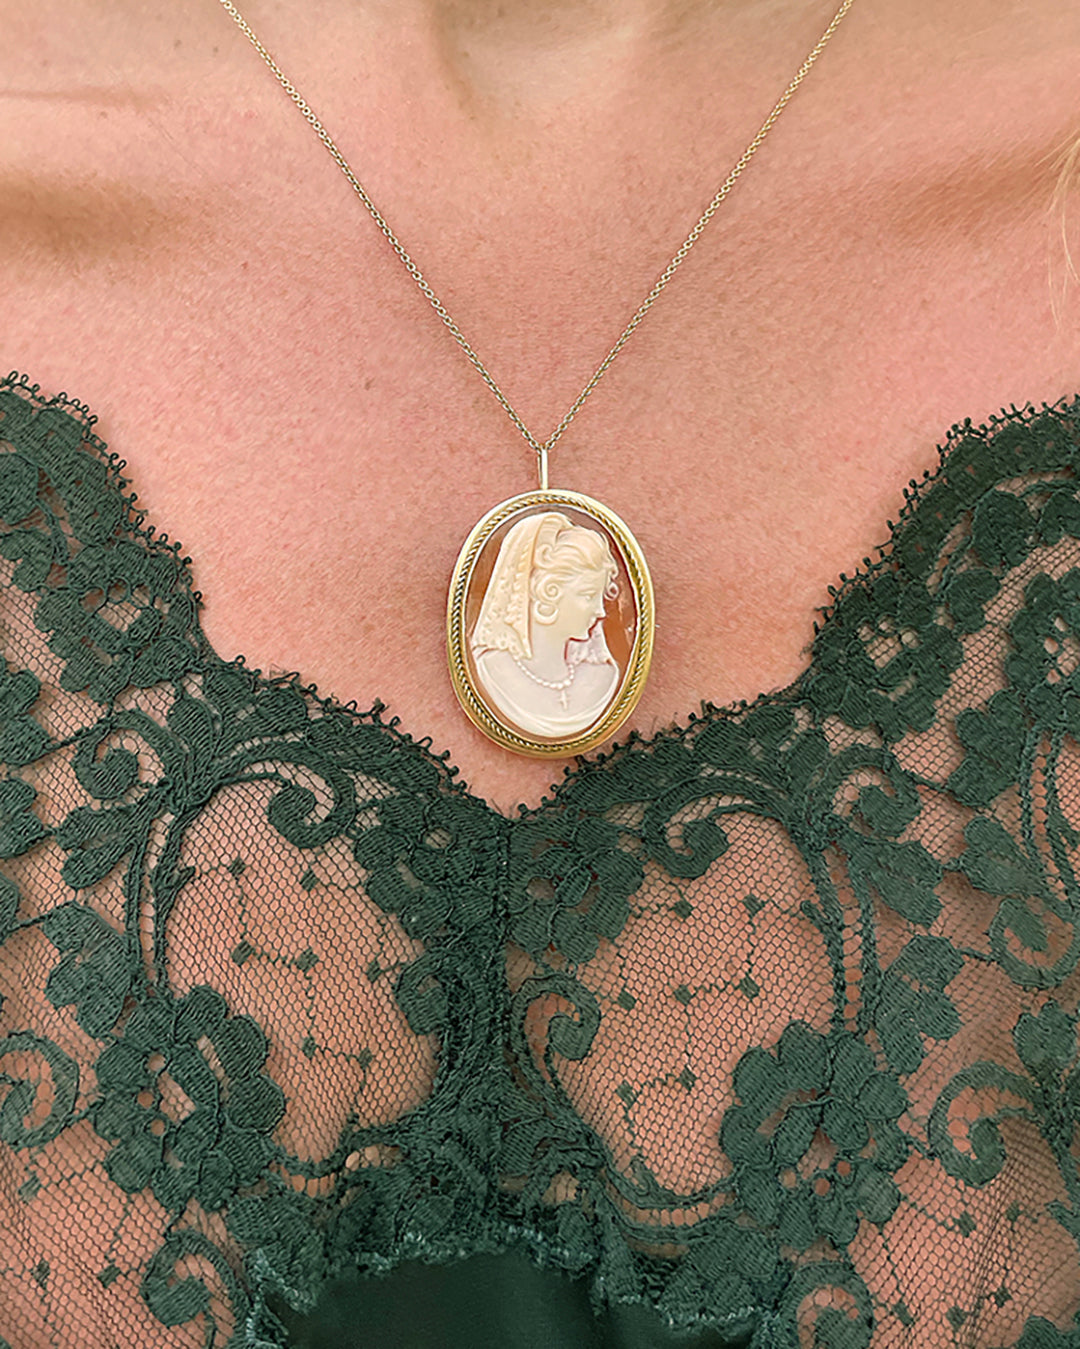 VINTAGE 18K GOLD CARVED SHELL CAMEO PENDANT